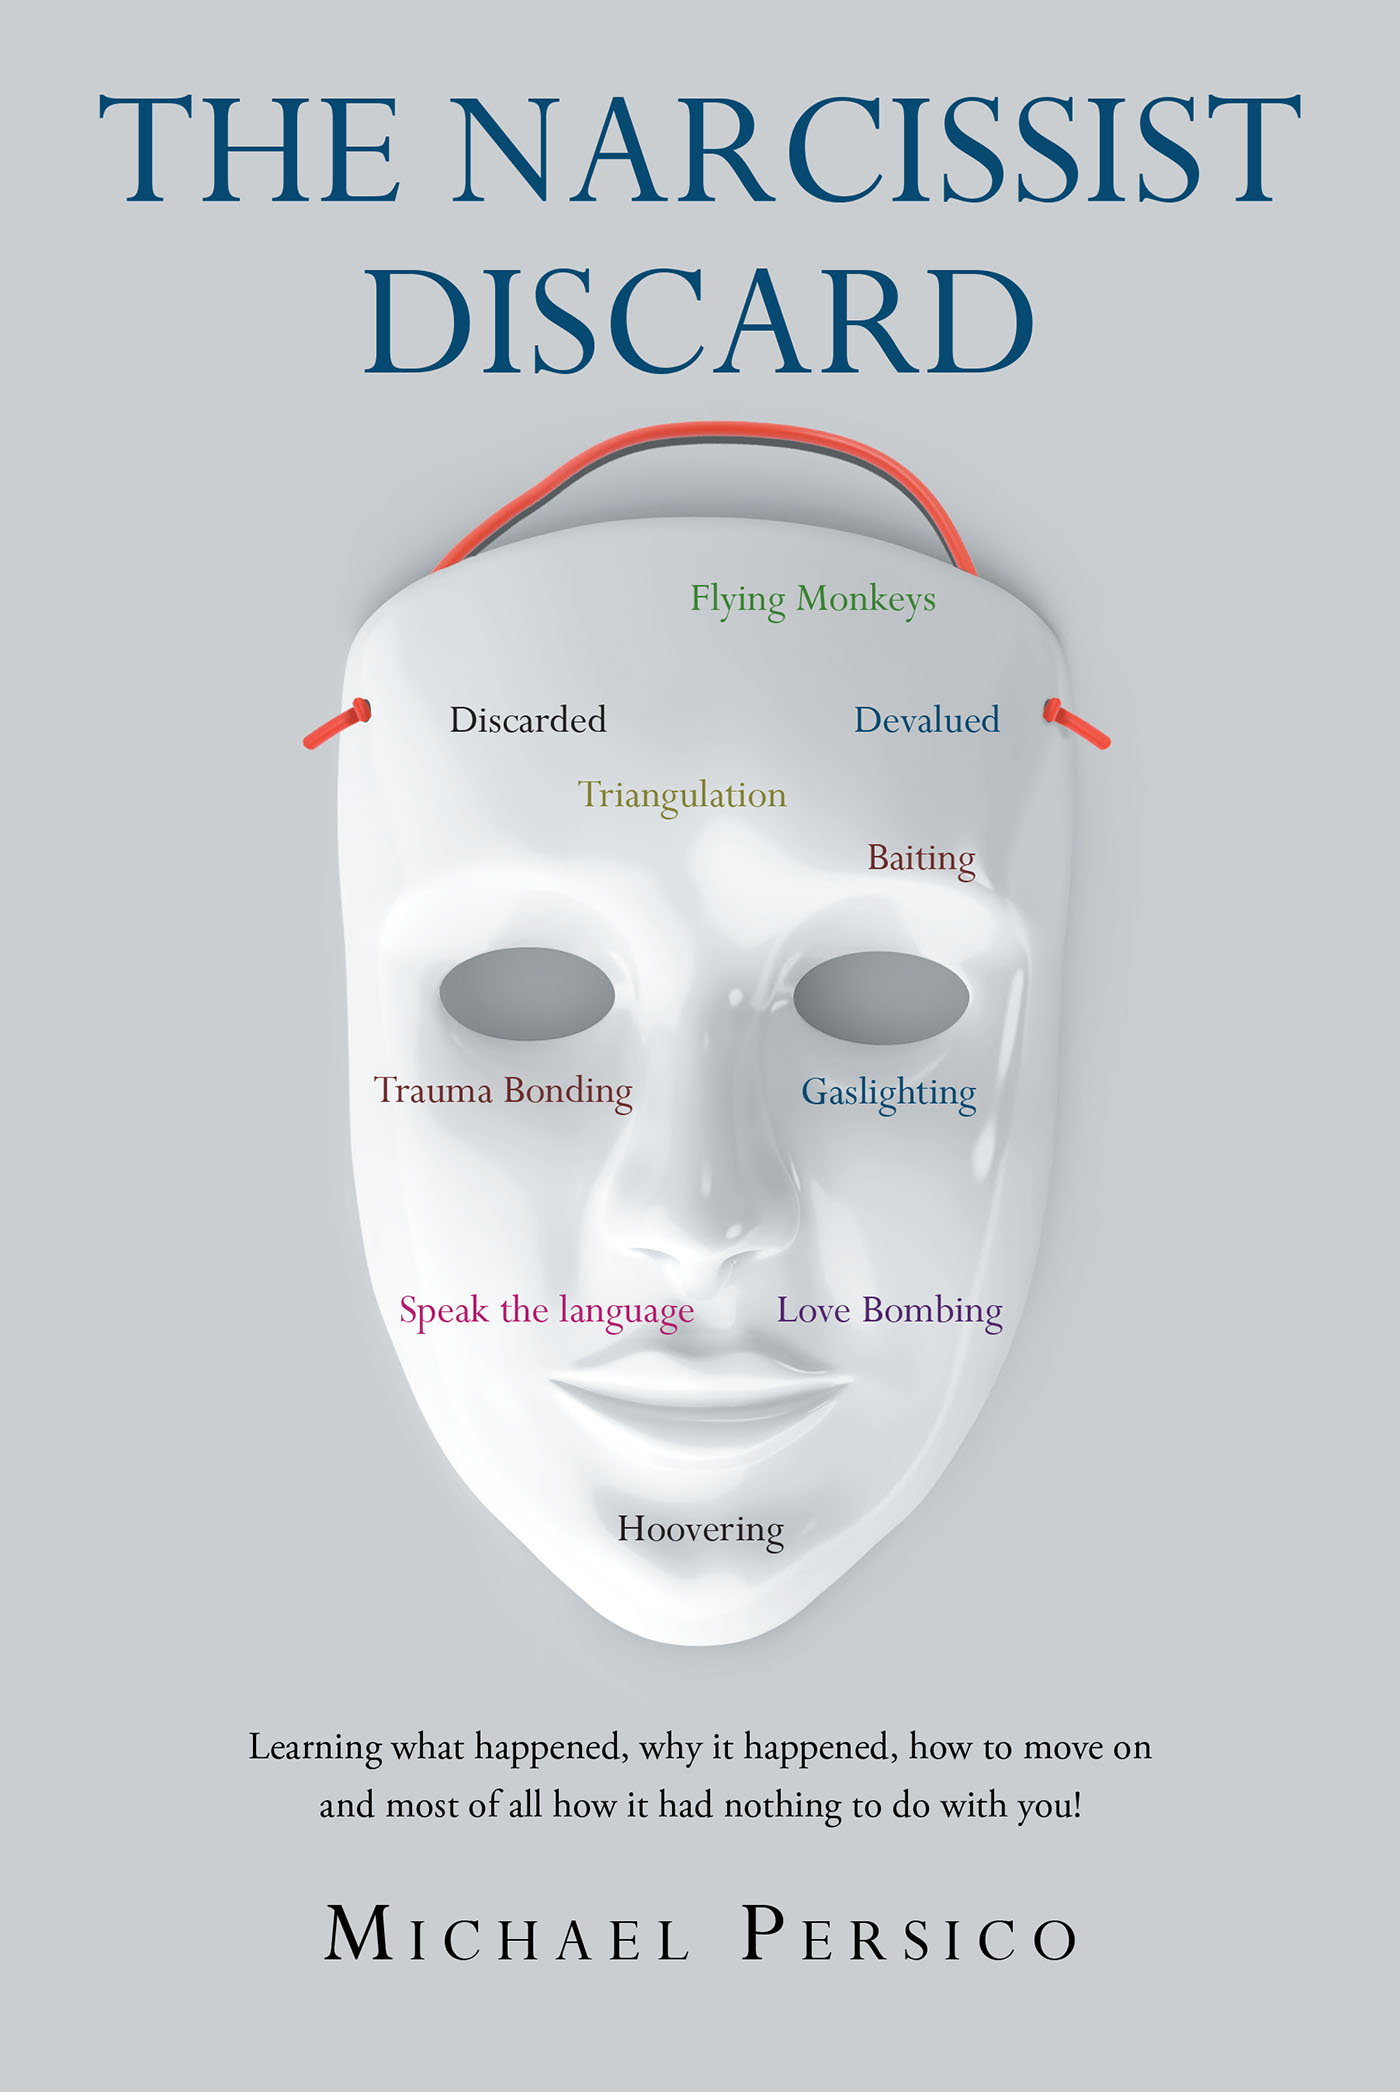 Author Michael Persico’s New Book, "The Narcissist Discard," is a Book That Seeks to Define Covert Narcissism and Help Others Spot It